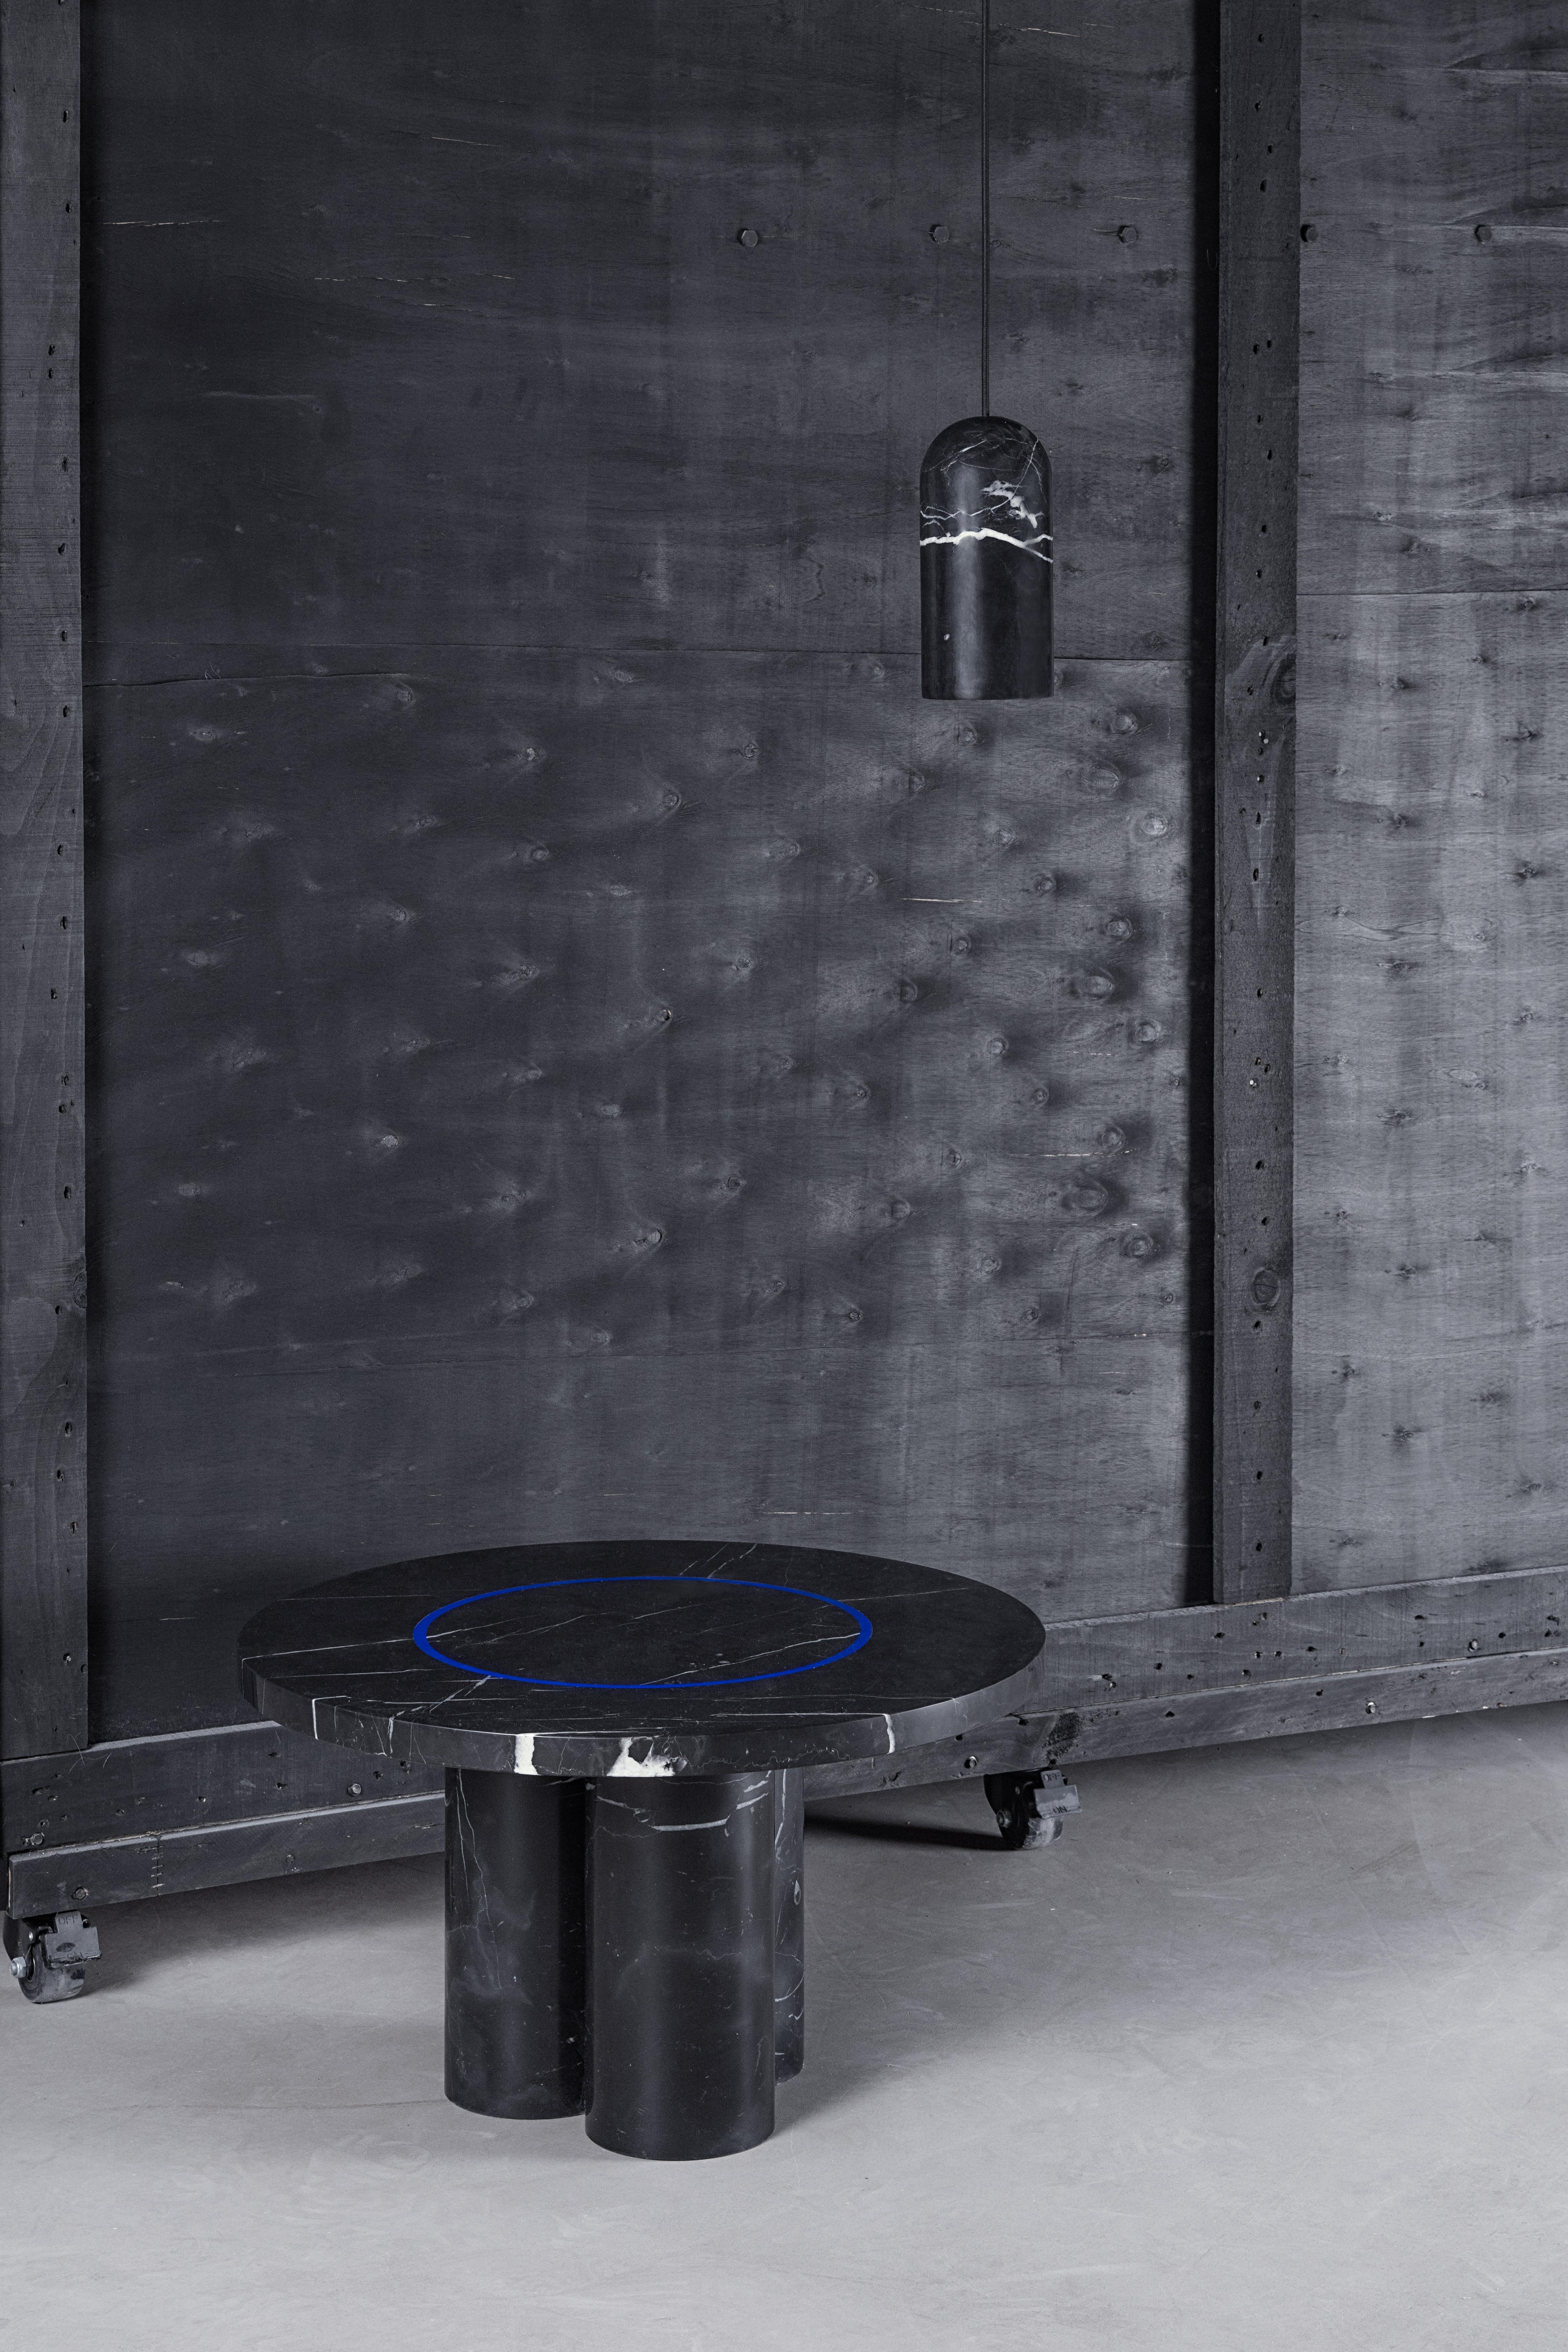 'DISLOCATION' collection by Buzao, small table
Black Marquina marble
Measures: 65 x H 38 cm

Studio Buzao from Guangzhou (China) is exploring innovation with furniture and lighting design. From marble to lava stone, from electroplated stainless